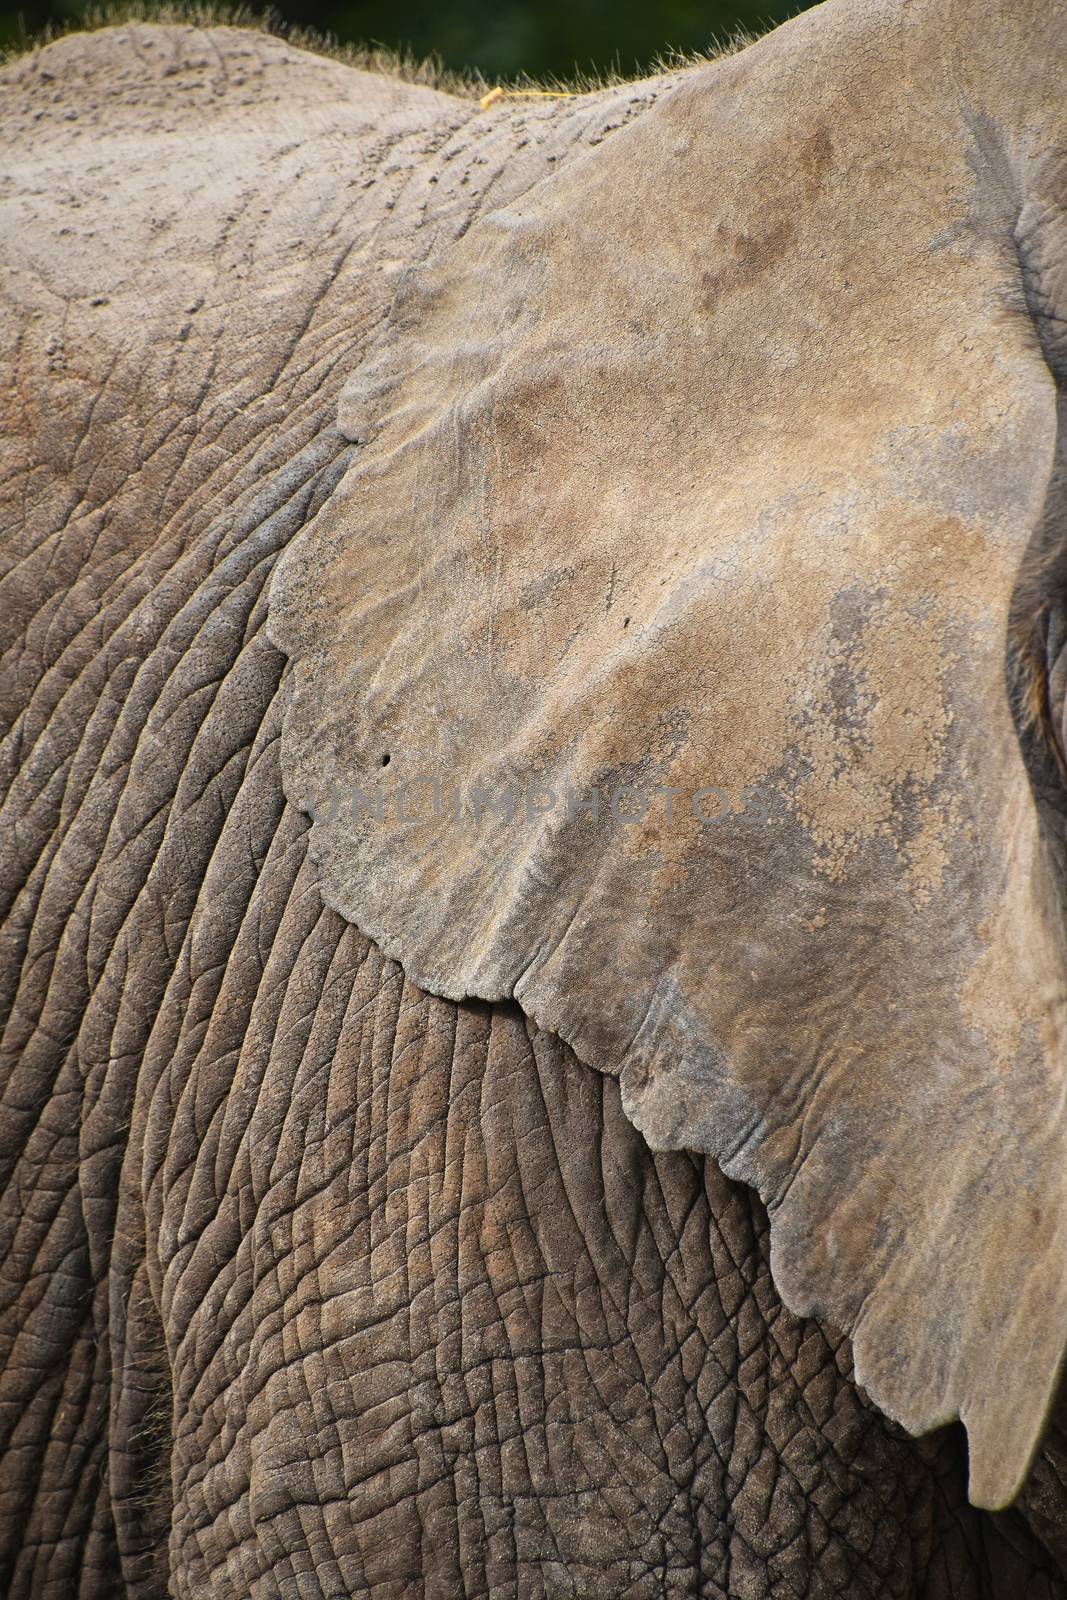 Extreme close up ear of African elephant, low angle side profile view